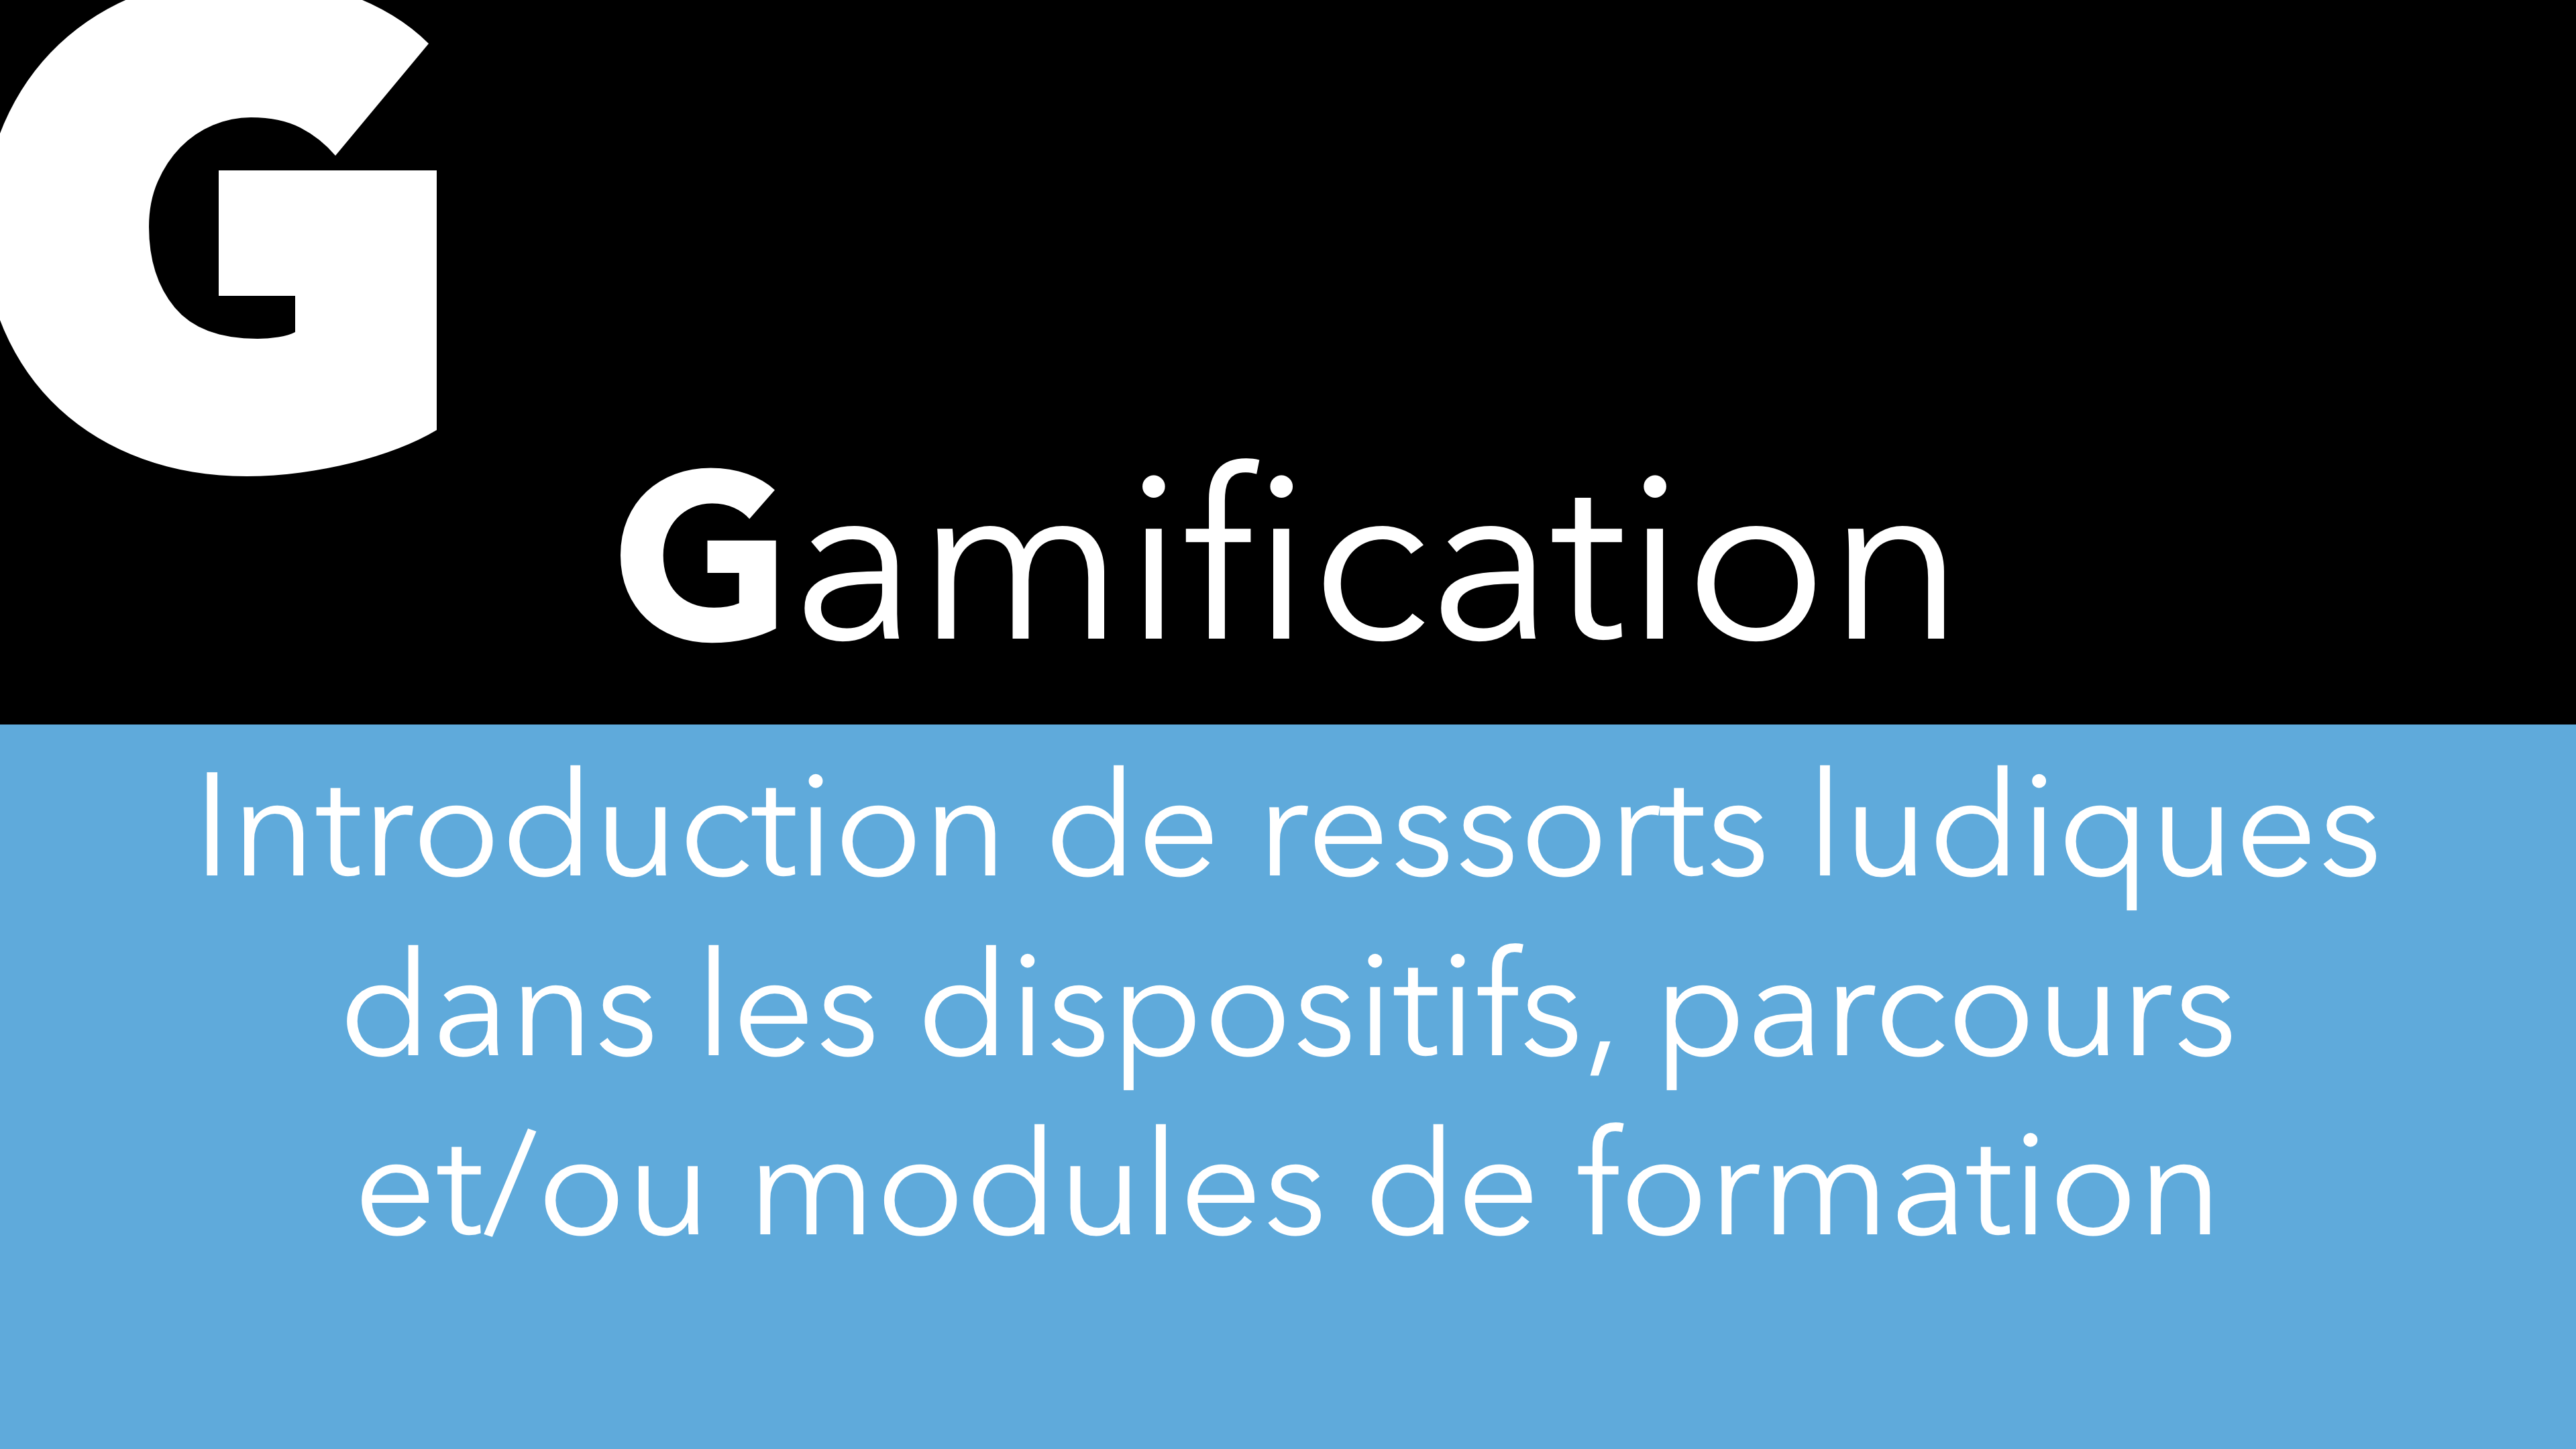 G – Gamification